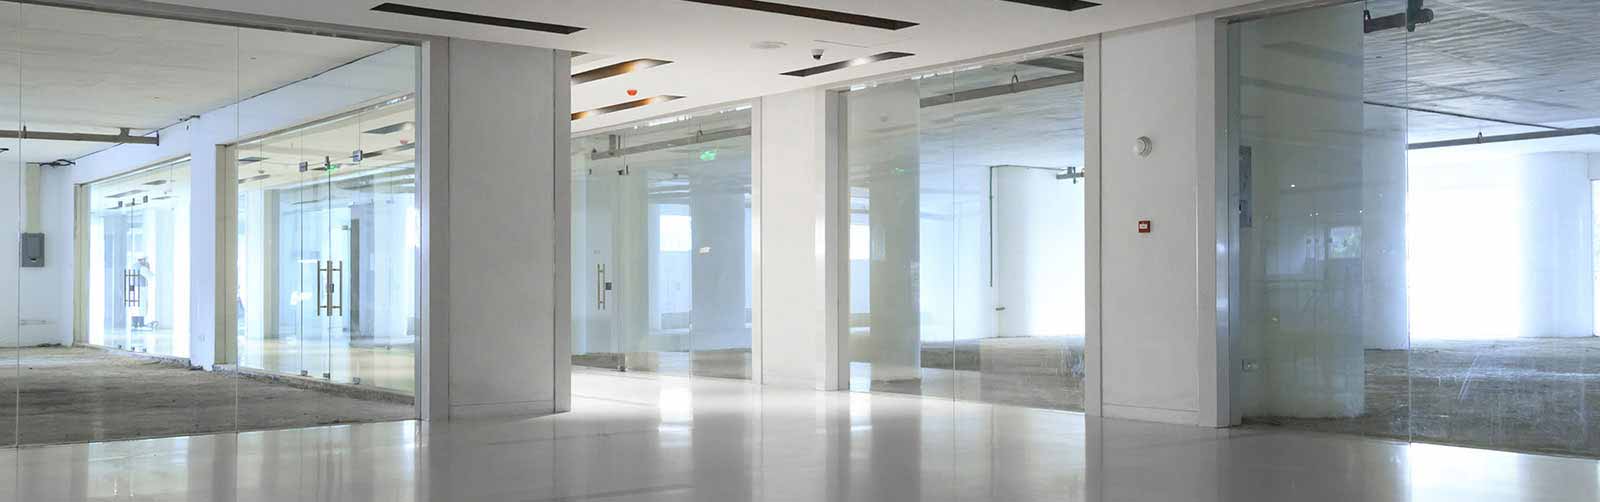 Toughened Glass Manufacturers in Pakistan